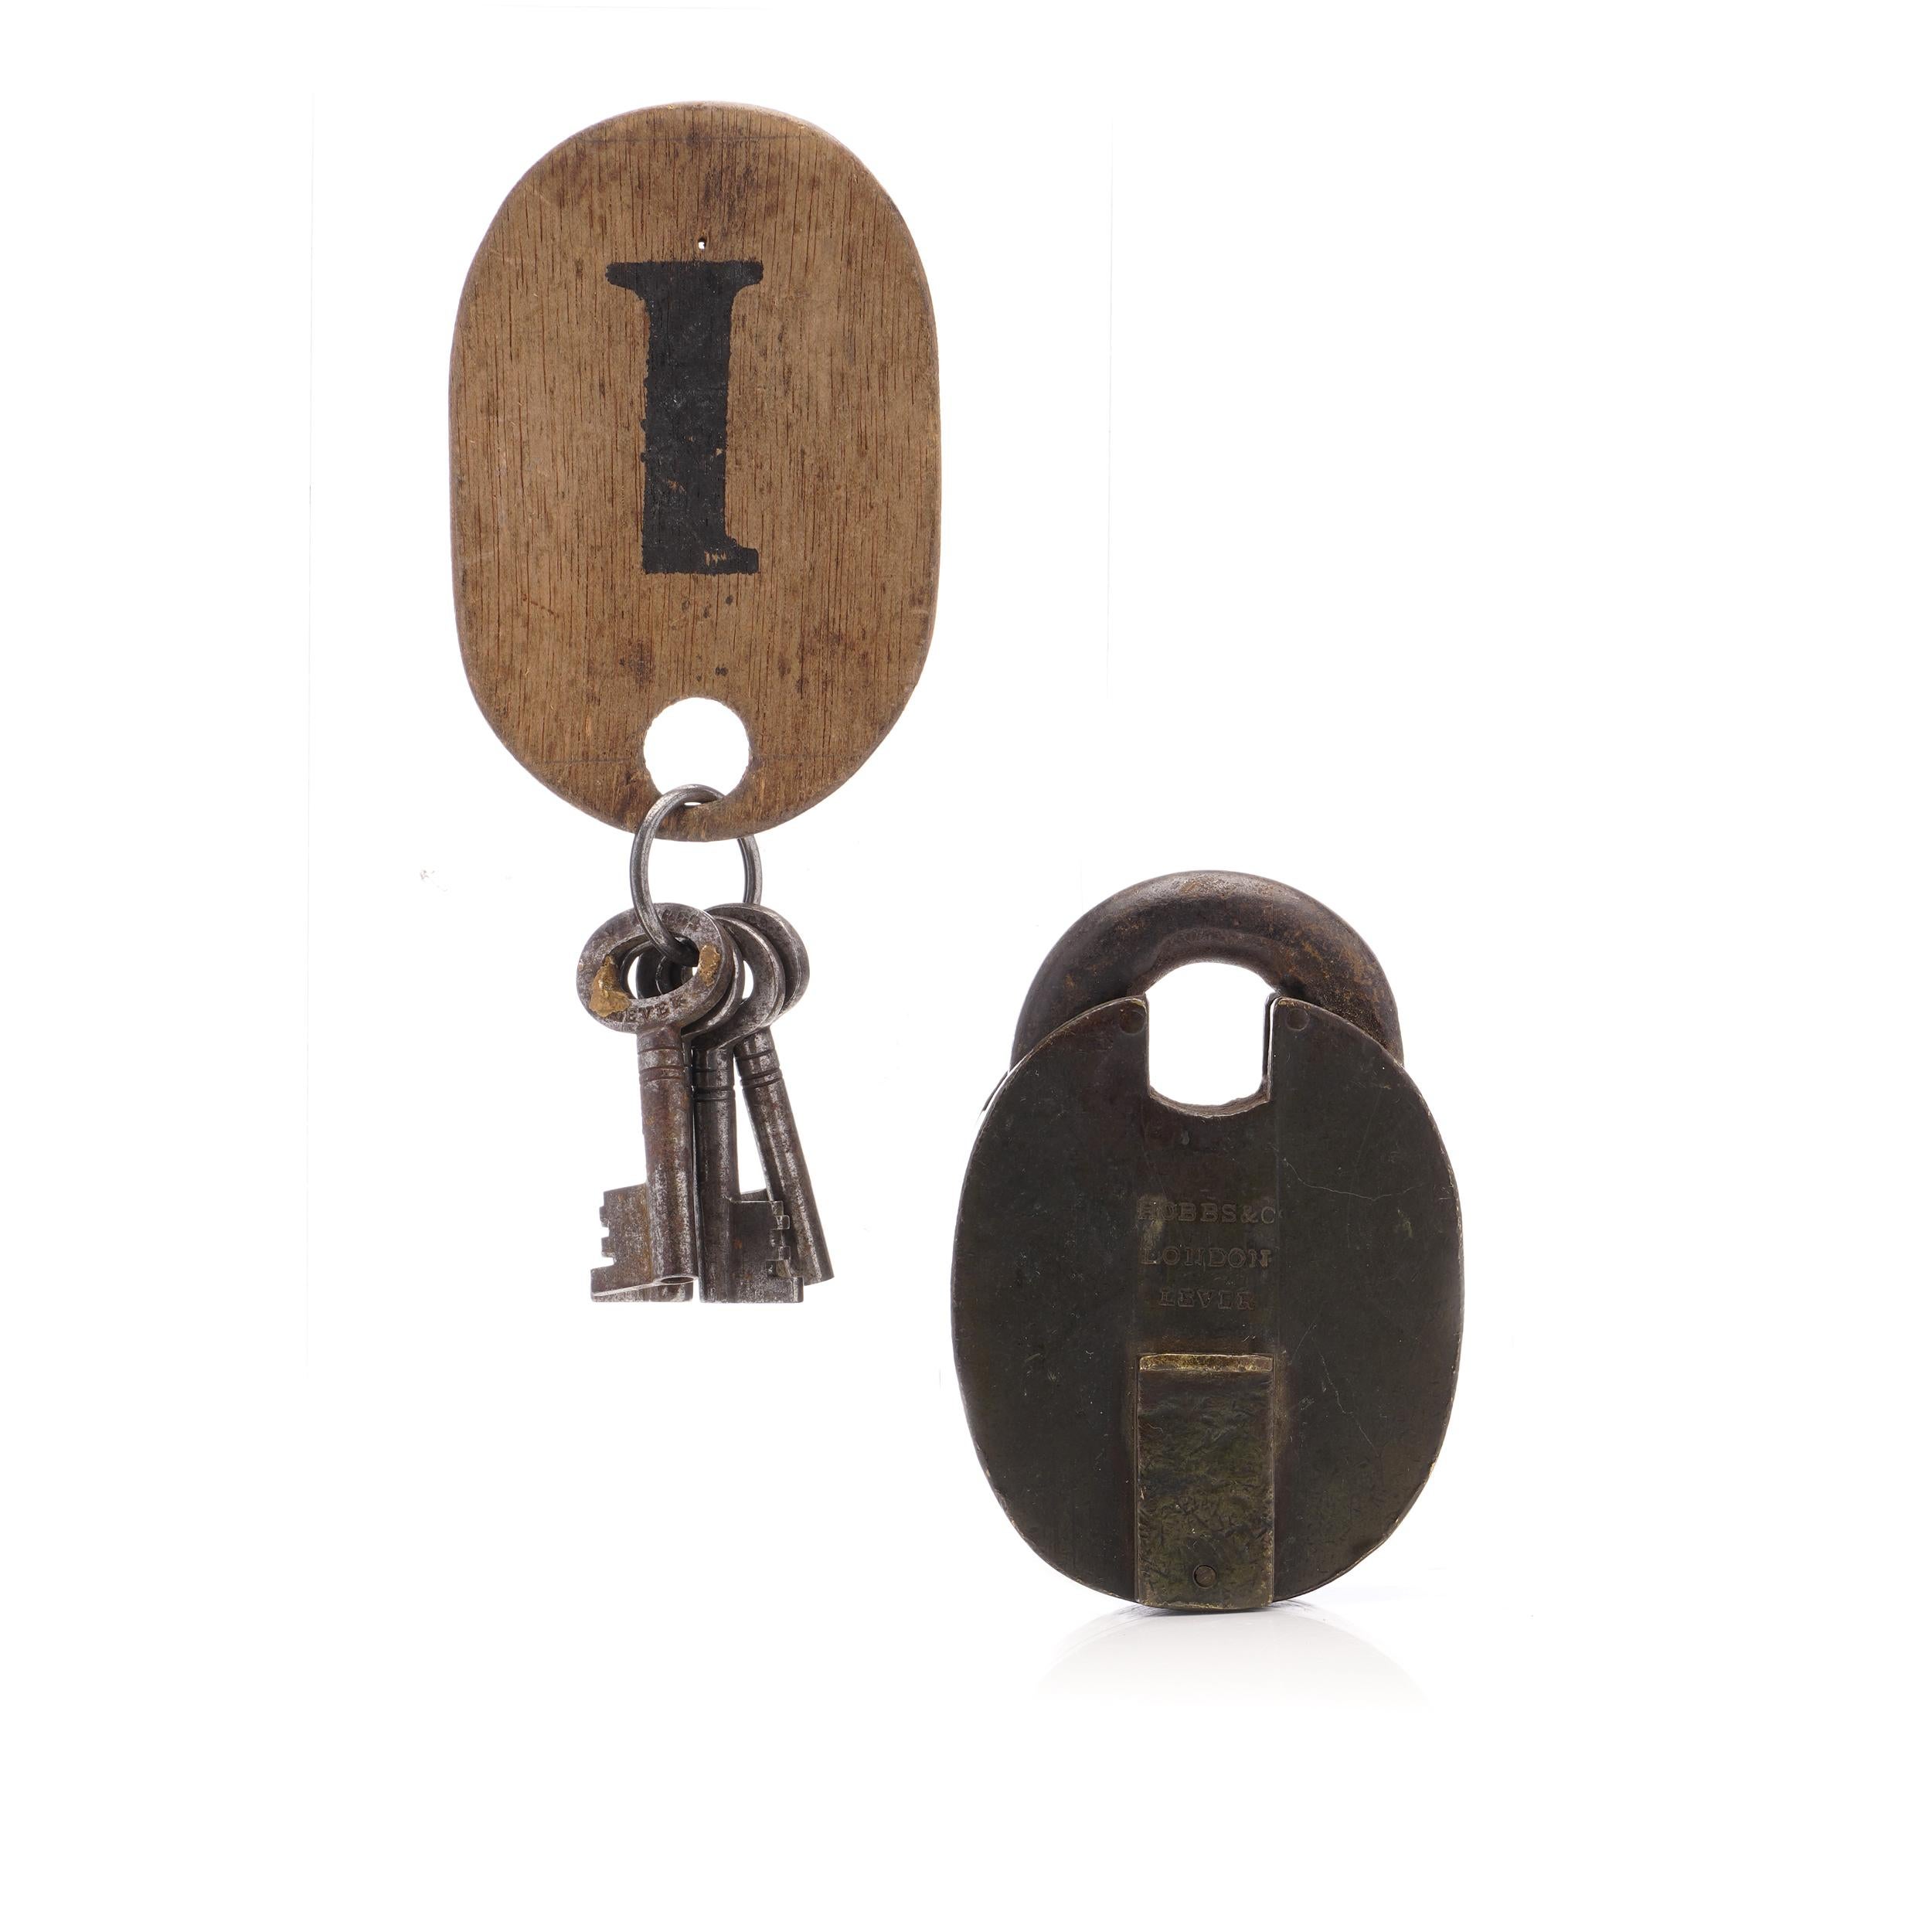 The Hobbs & Co. Victorian heavy iron padlock with its original key is a remarkable piece of history and craftsmanship. This antique lock, measuring 9.2 cm x 6.3 cm x 2.5 cm and weighing 702 grams, represents the ingenuity of its time.

Comes with 2